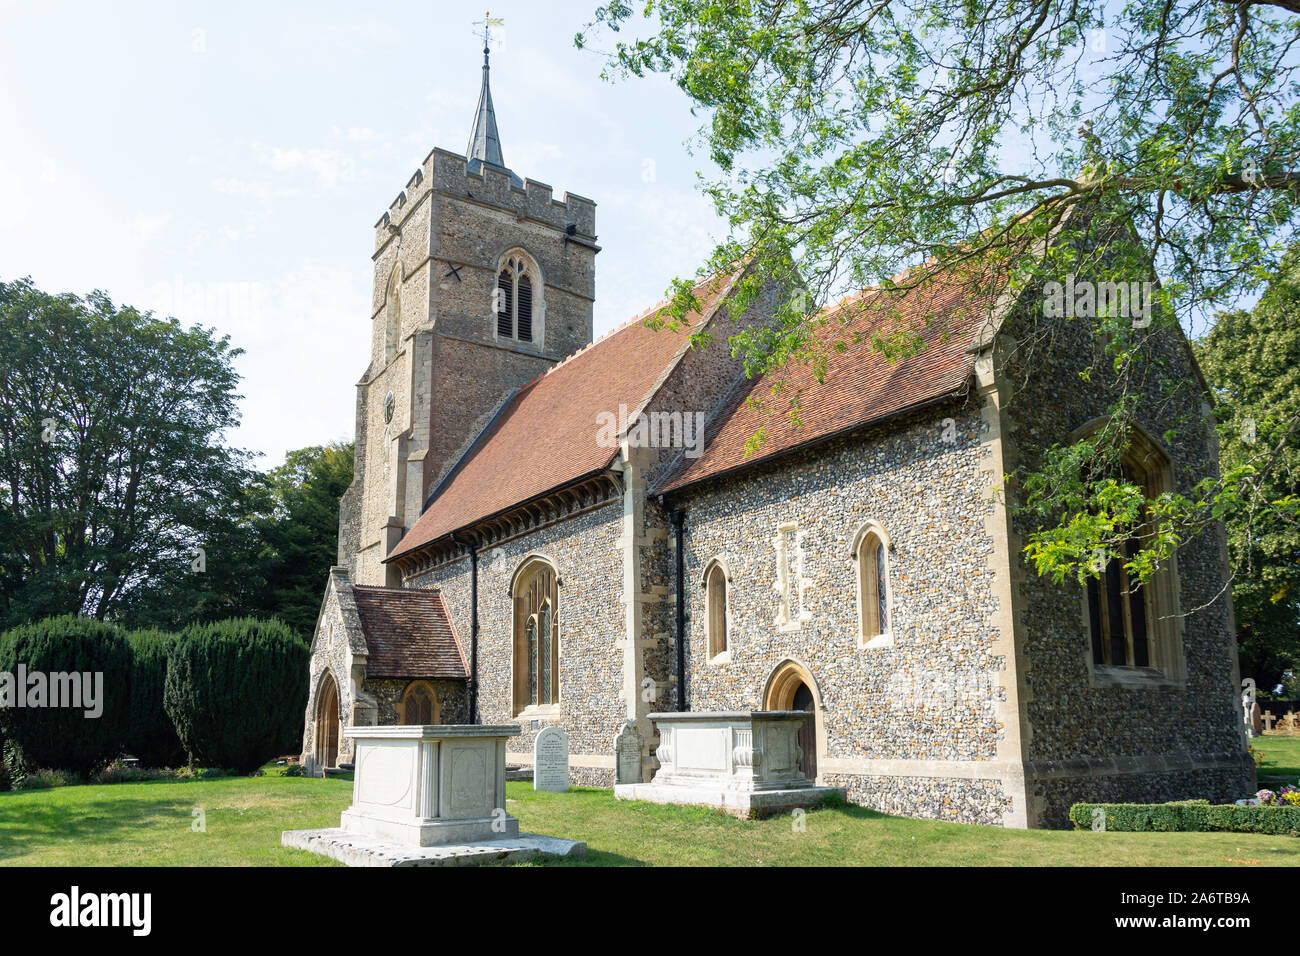 St Mary the Virgin Church, Flint Cottages, Westmill, Hertfordshire, England, United Kingdom Stock Photo